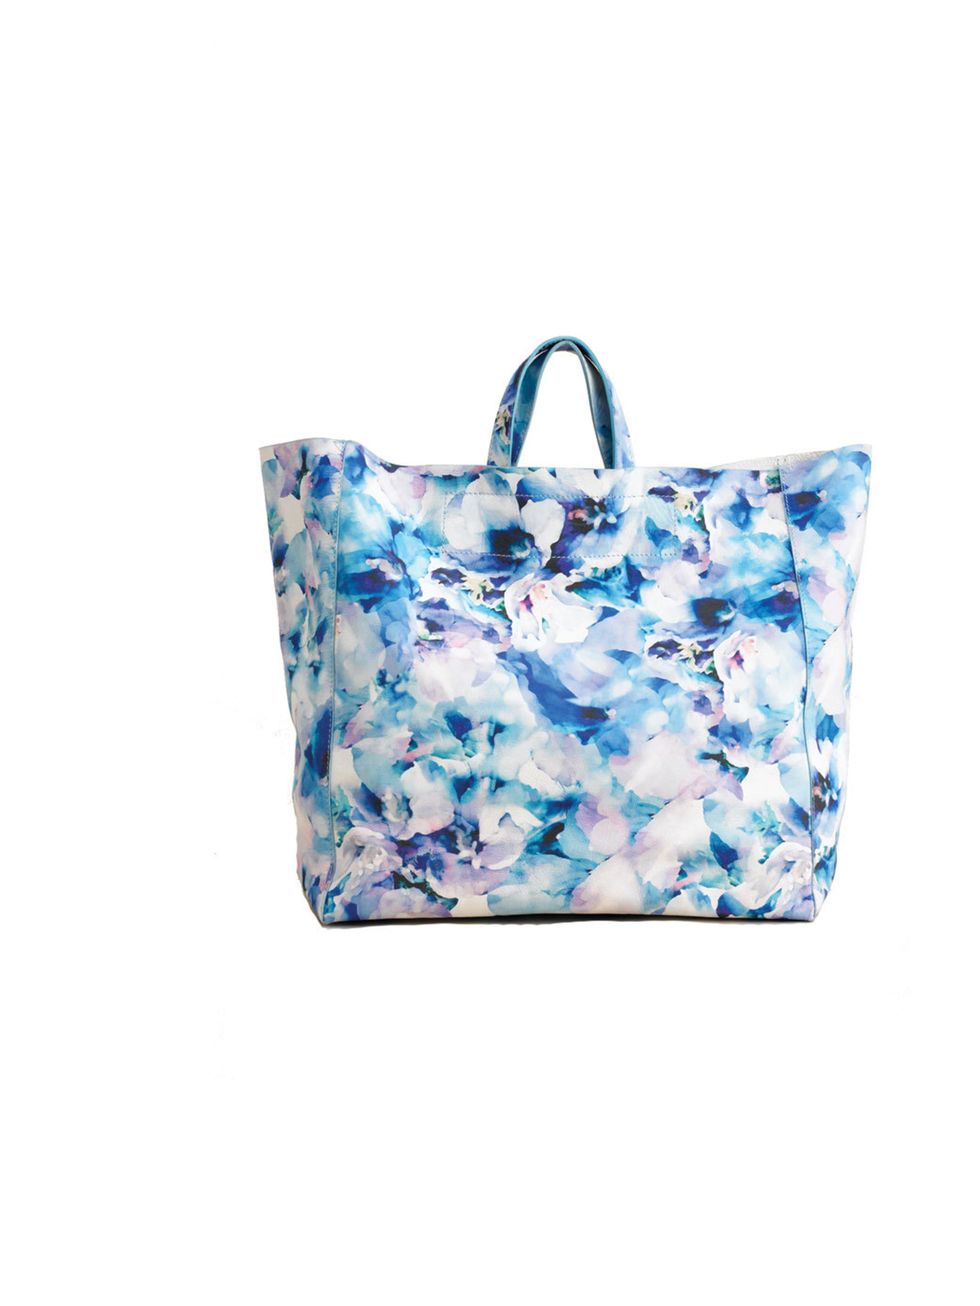 <p>Brighten up any look in a flash with this gorgeous leather tote Taiuti printed tote, £180, at Fenwick, for stockists call 0207 629 9161</p>